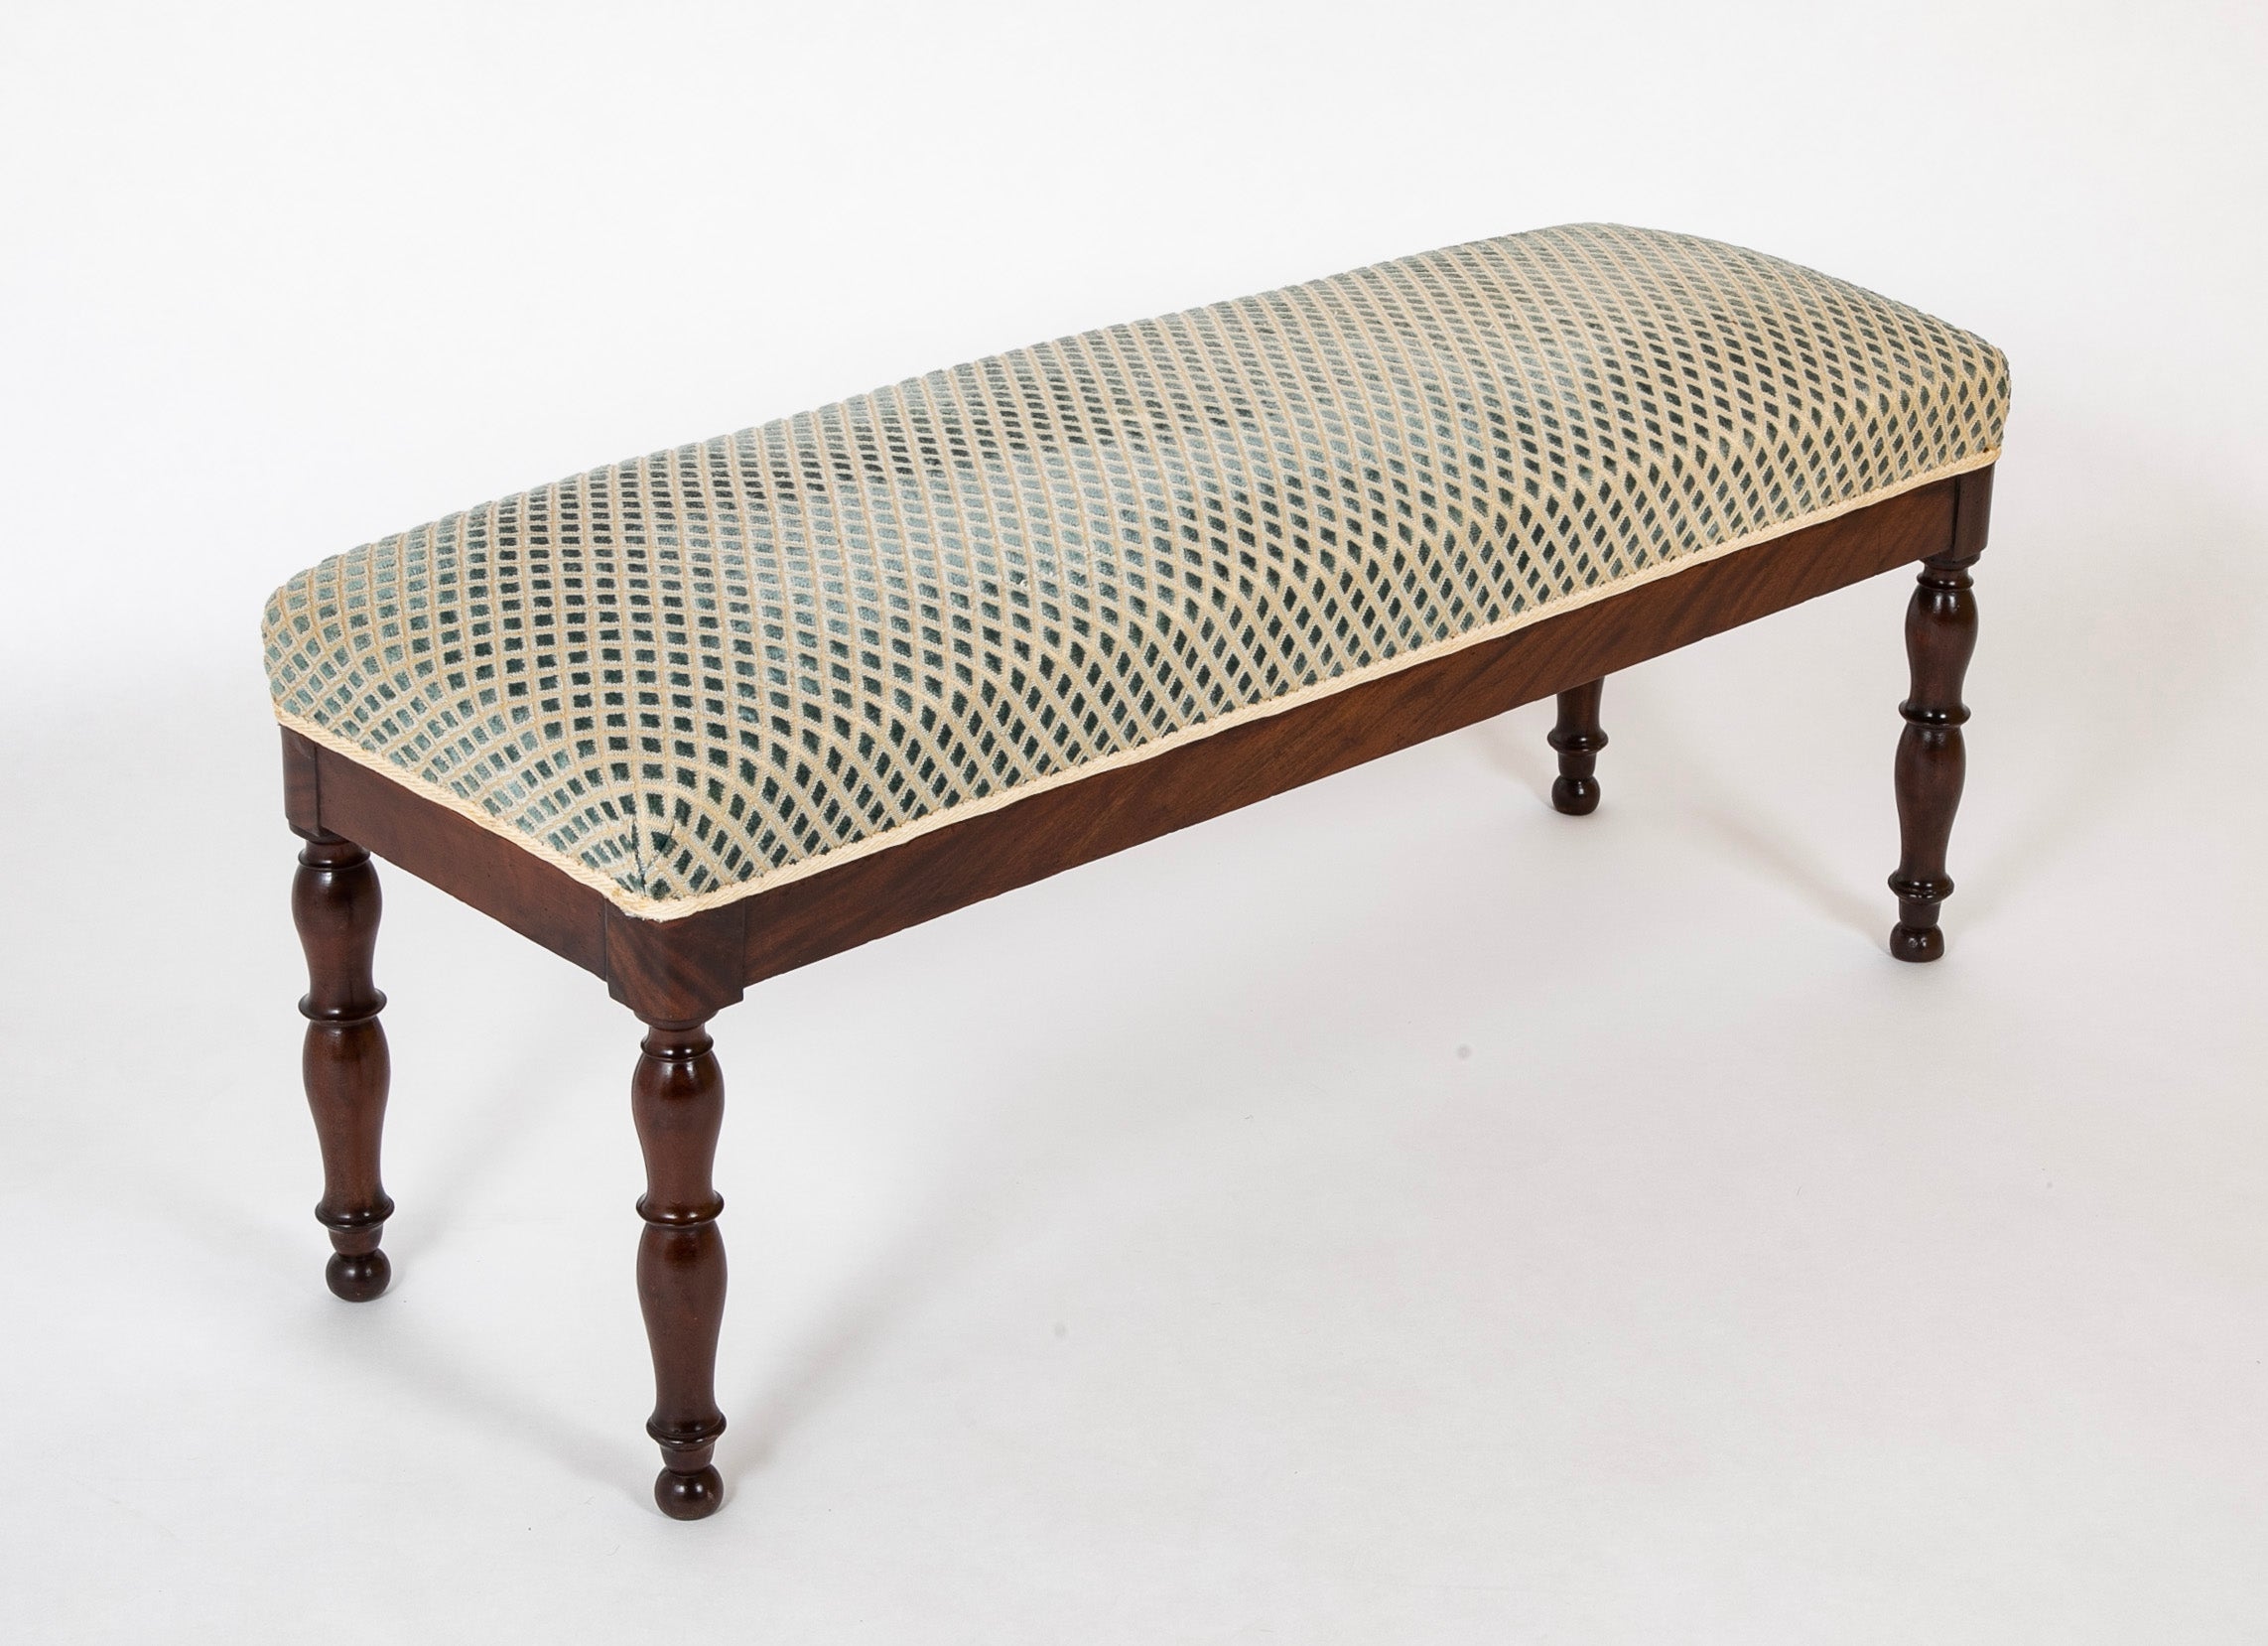 A Louis Philippe Mahogany Upholstered Bench